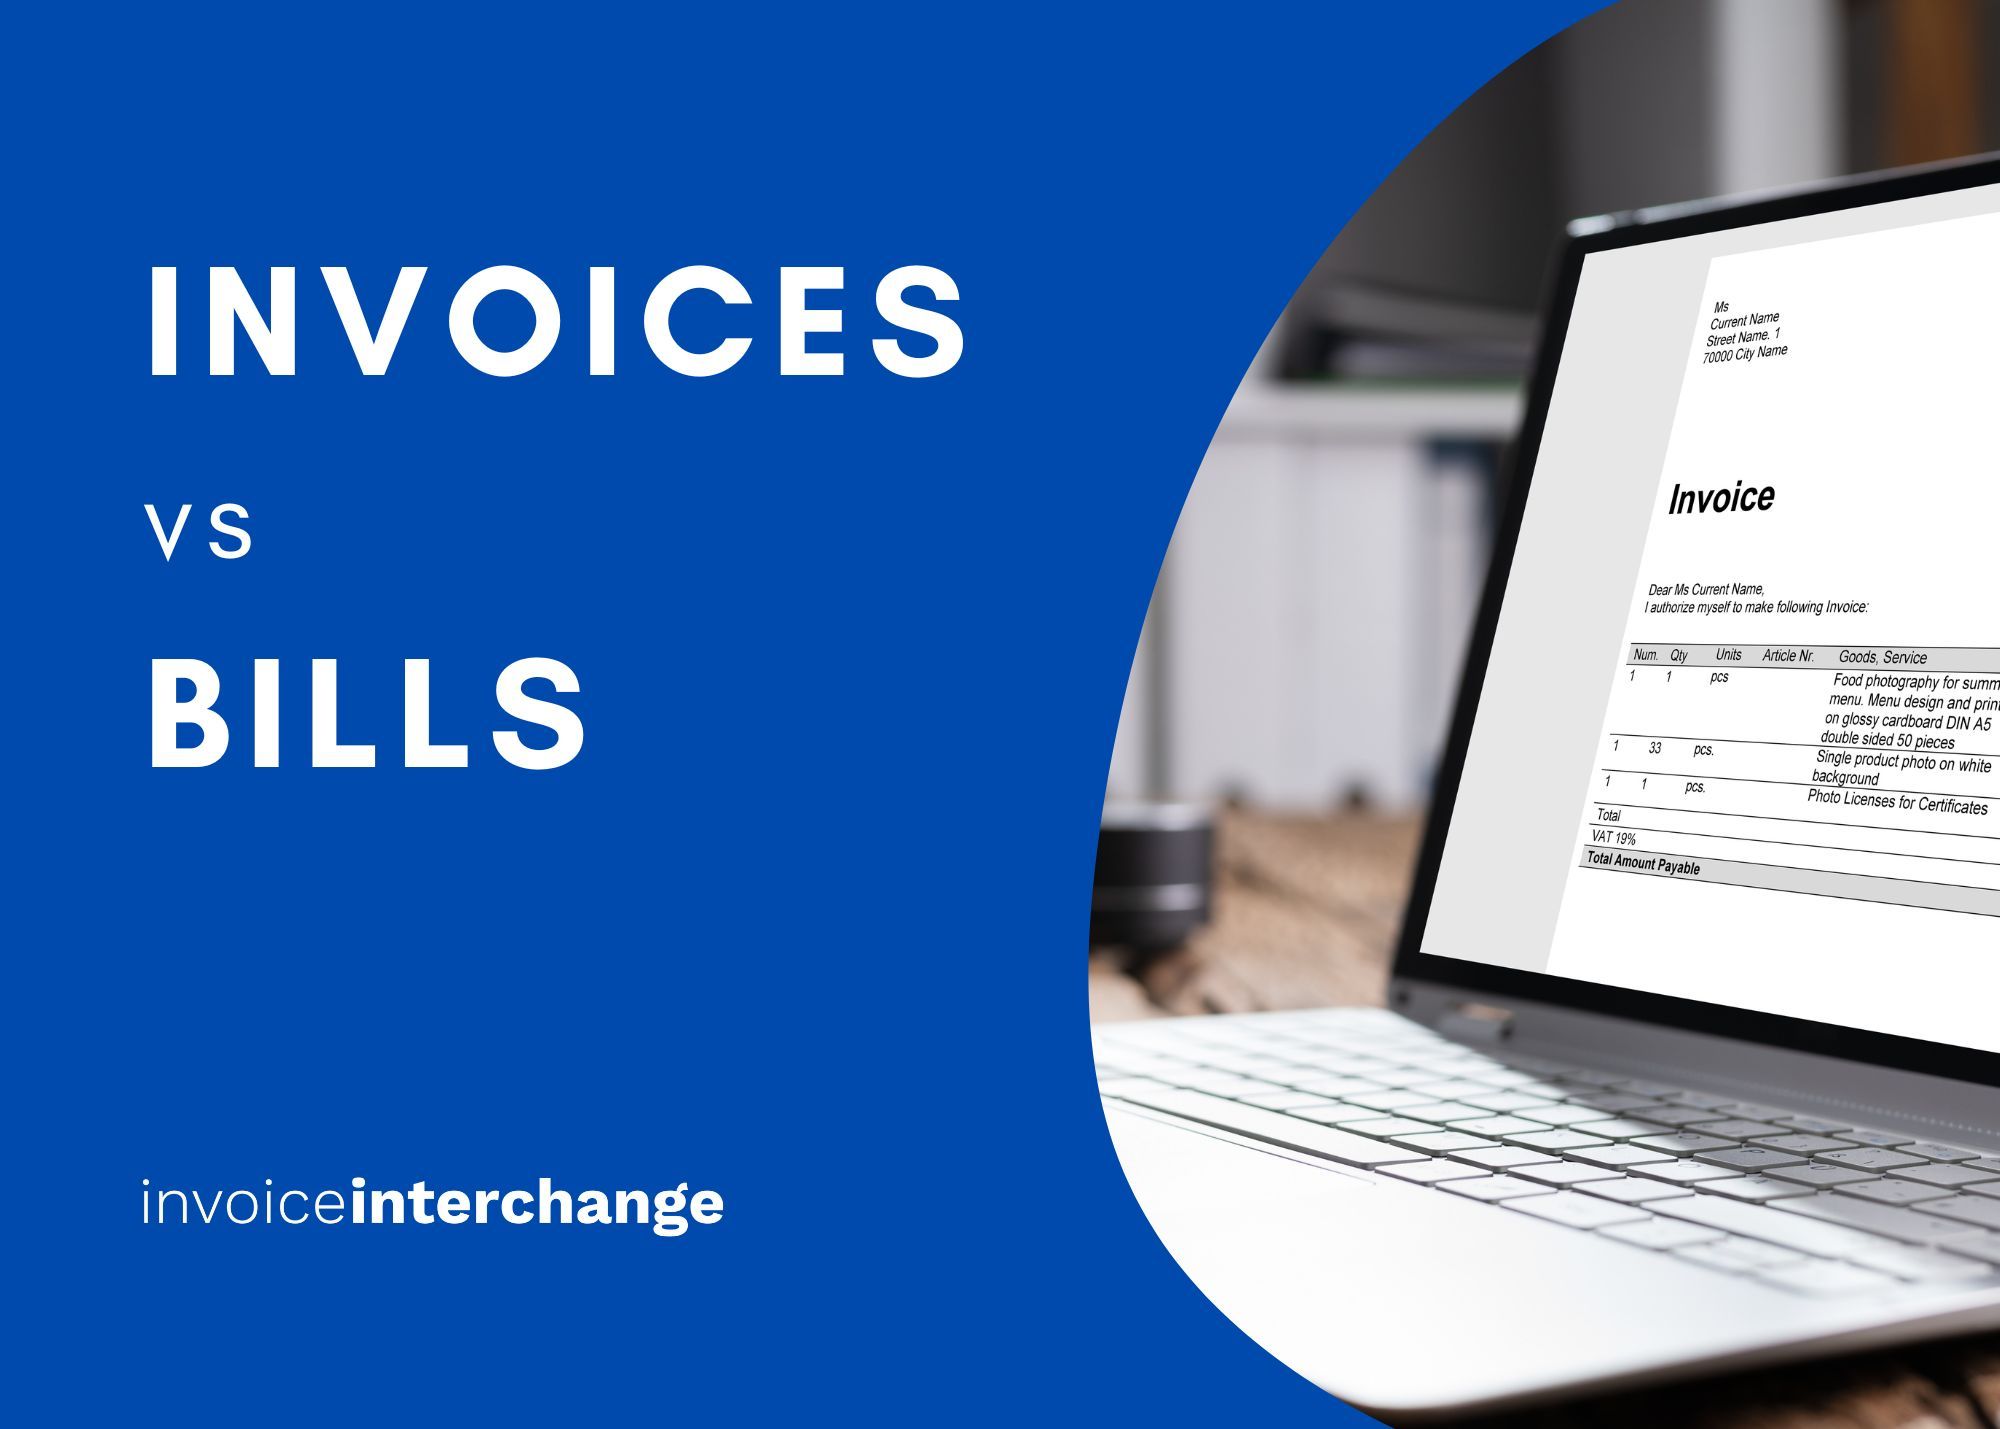 Are Invoices and Bills the Same Thing?